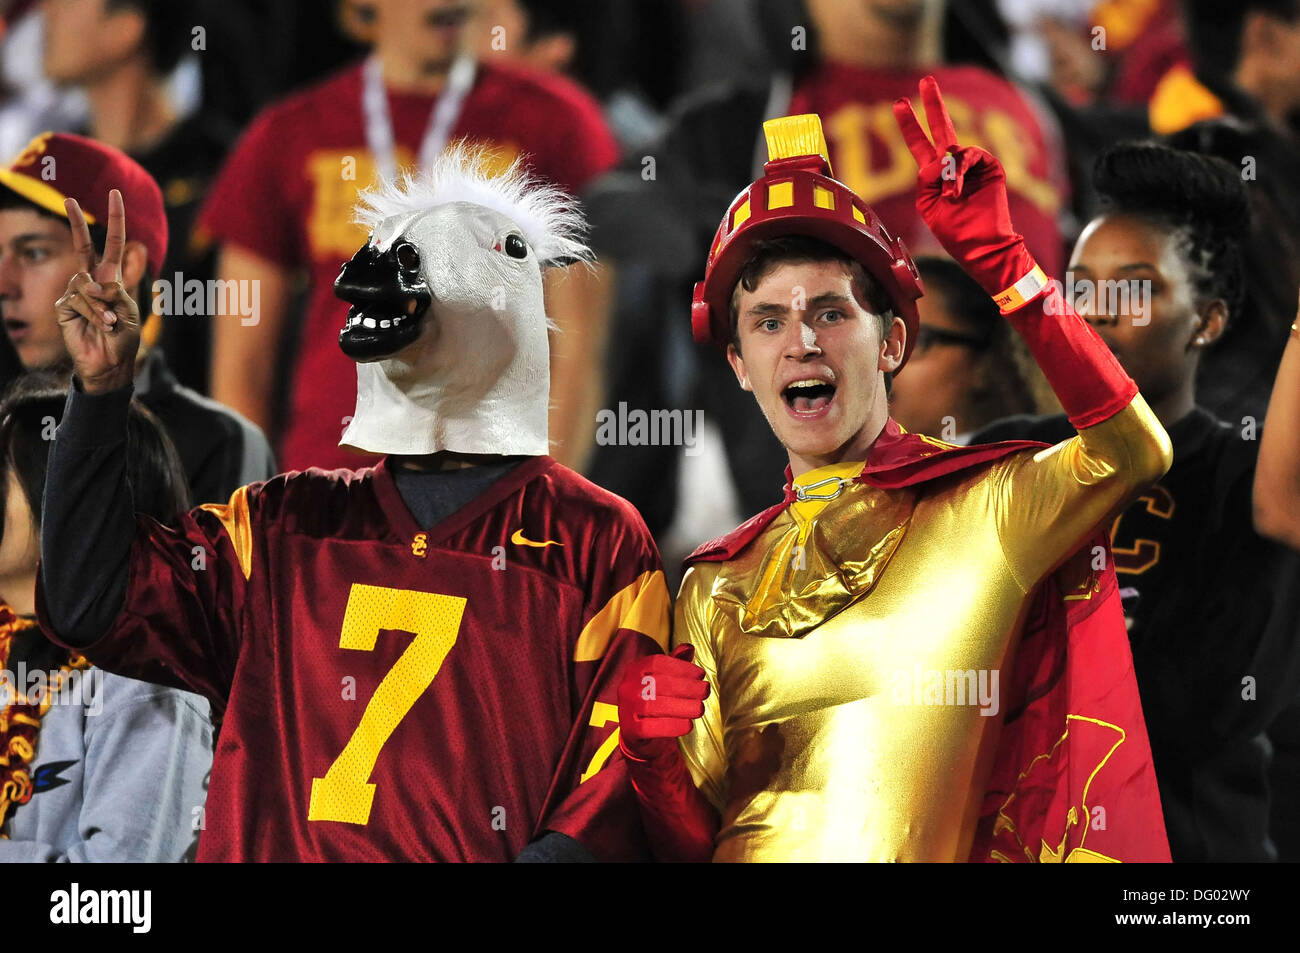 October 10, 2013 Los Angeles, CA.USC Trojans Fans Dressed as the Trojans Mascots Traveler and Tommy Trojan during the NCAA Football game between the USC Trojans and the Arizona Wildcats at the Coliseum in Los Angeles, California.The USC Trojans defeat the Arizona Wildcats 38-31.Louis Lopez/CSM Stock Photo